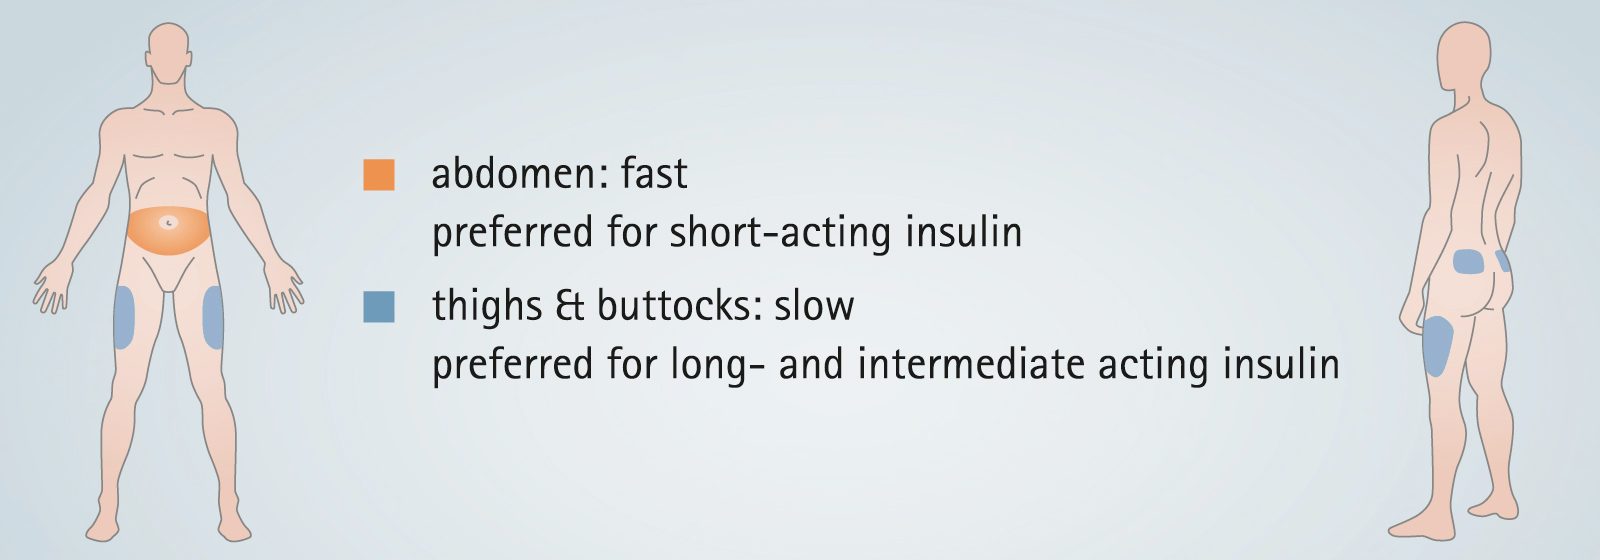 Insulin types and injection areas